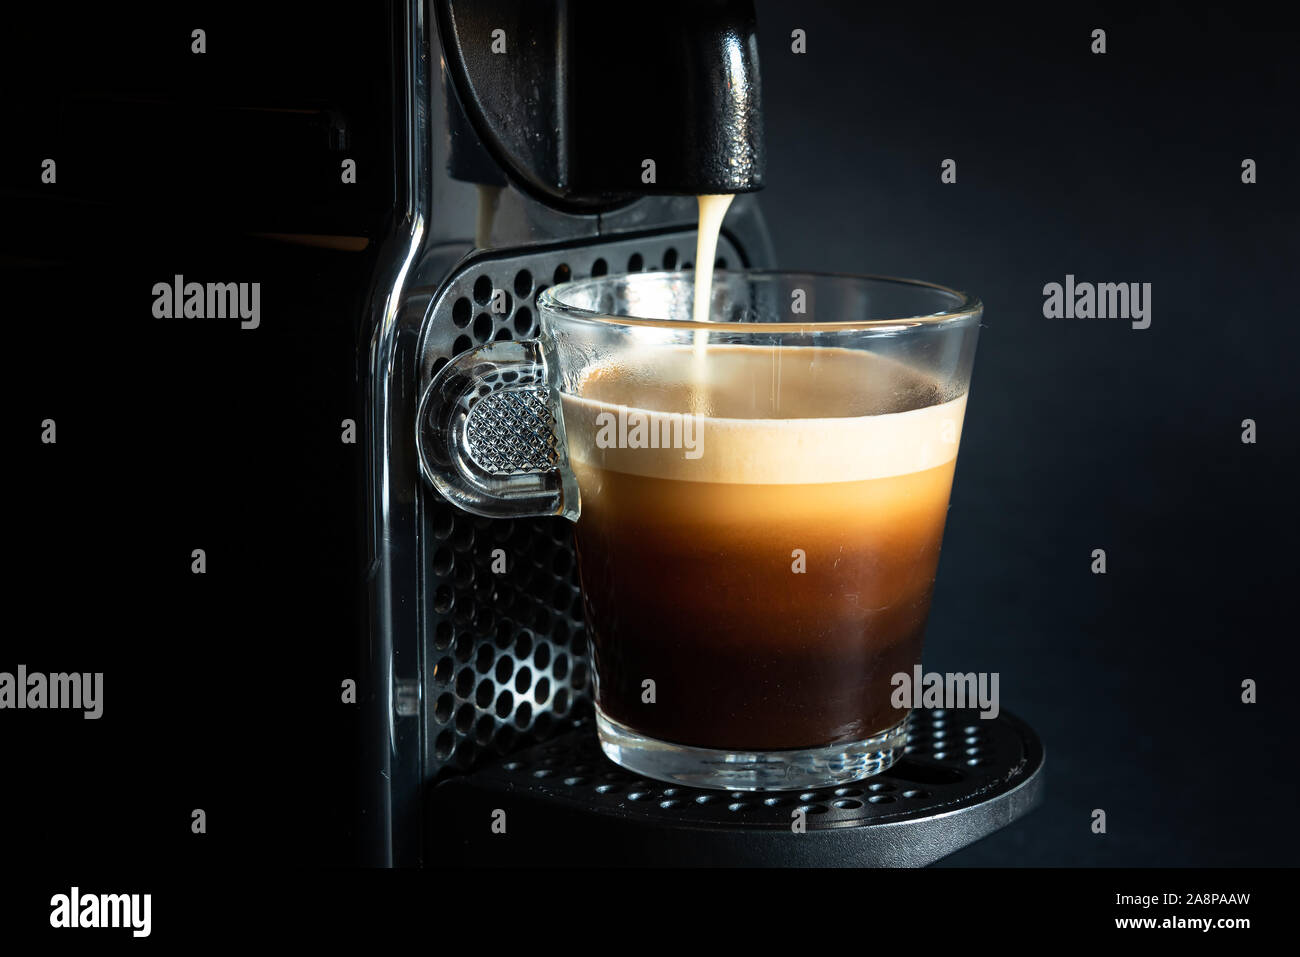 https://c8.alamy.com/comp/2A8PAAW/a-black-coffee-machine-fulling-a-glass-cup-of-coffee-2A8PAAW.jpg